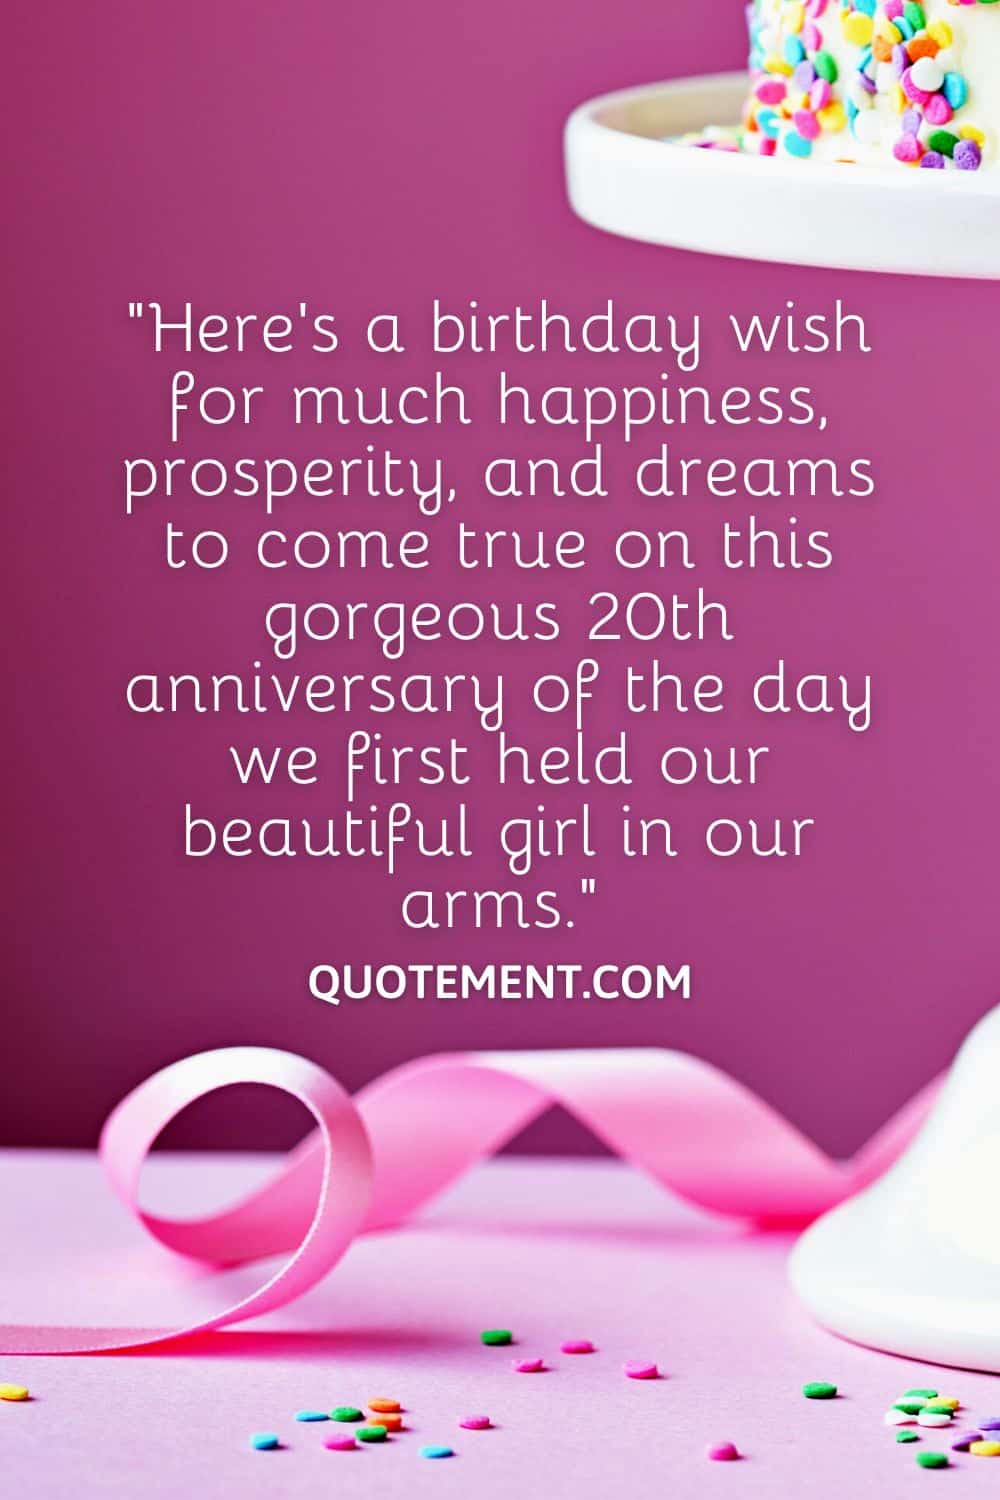 Here’s a birthday wish for much happiness, prosperity, and dreams